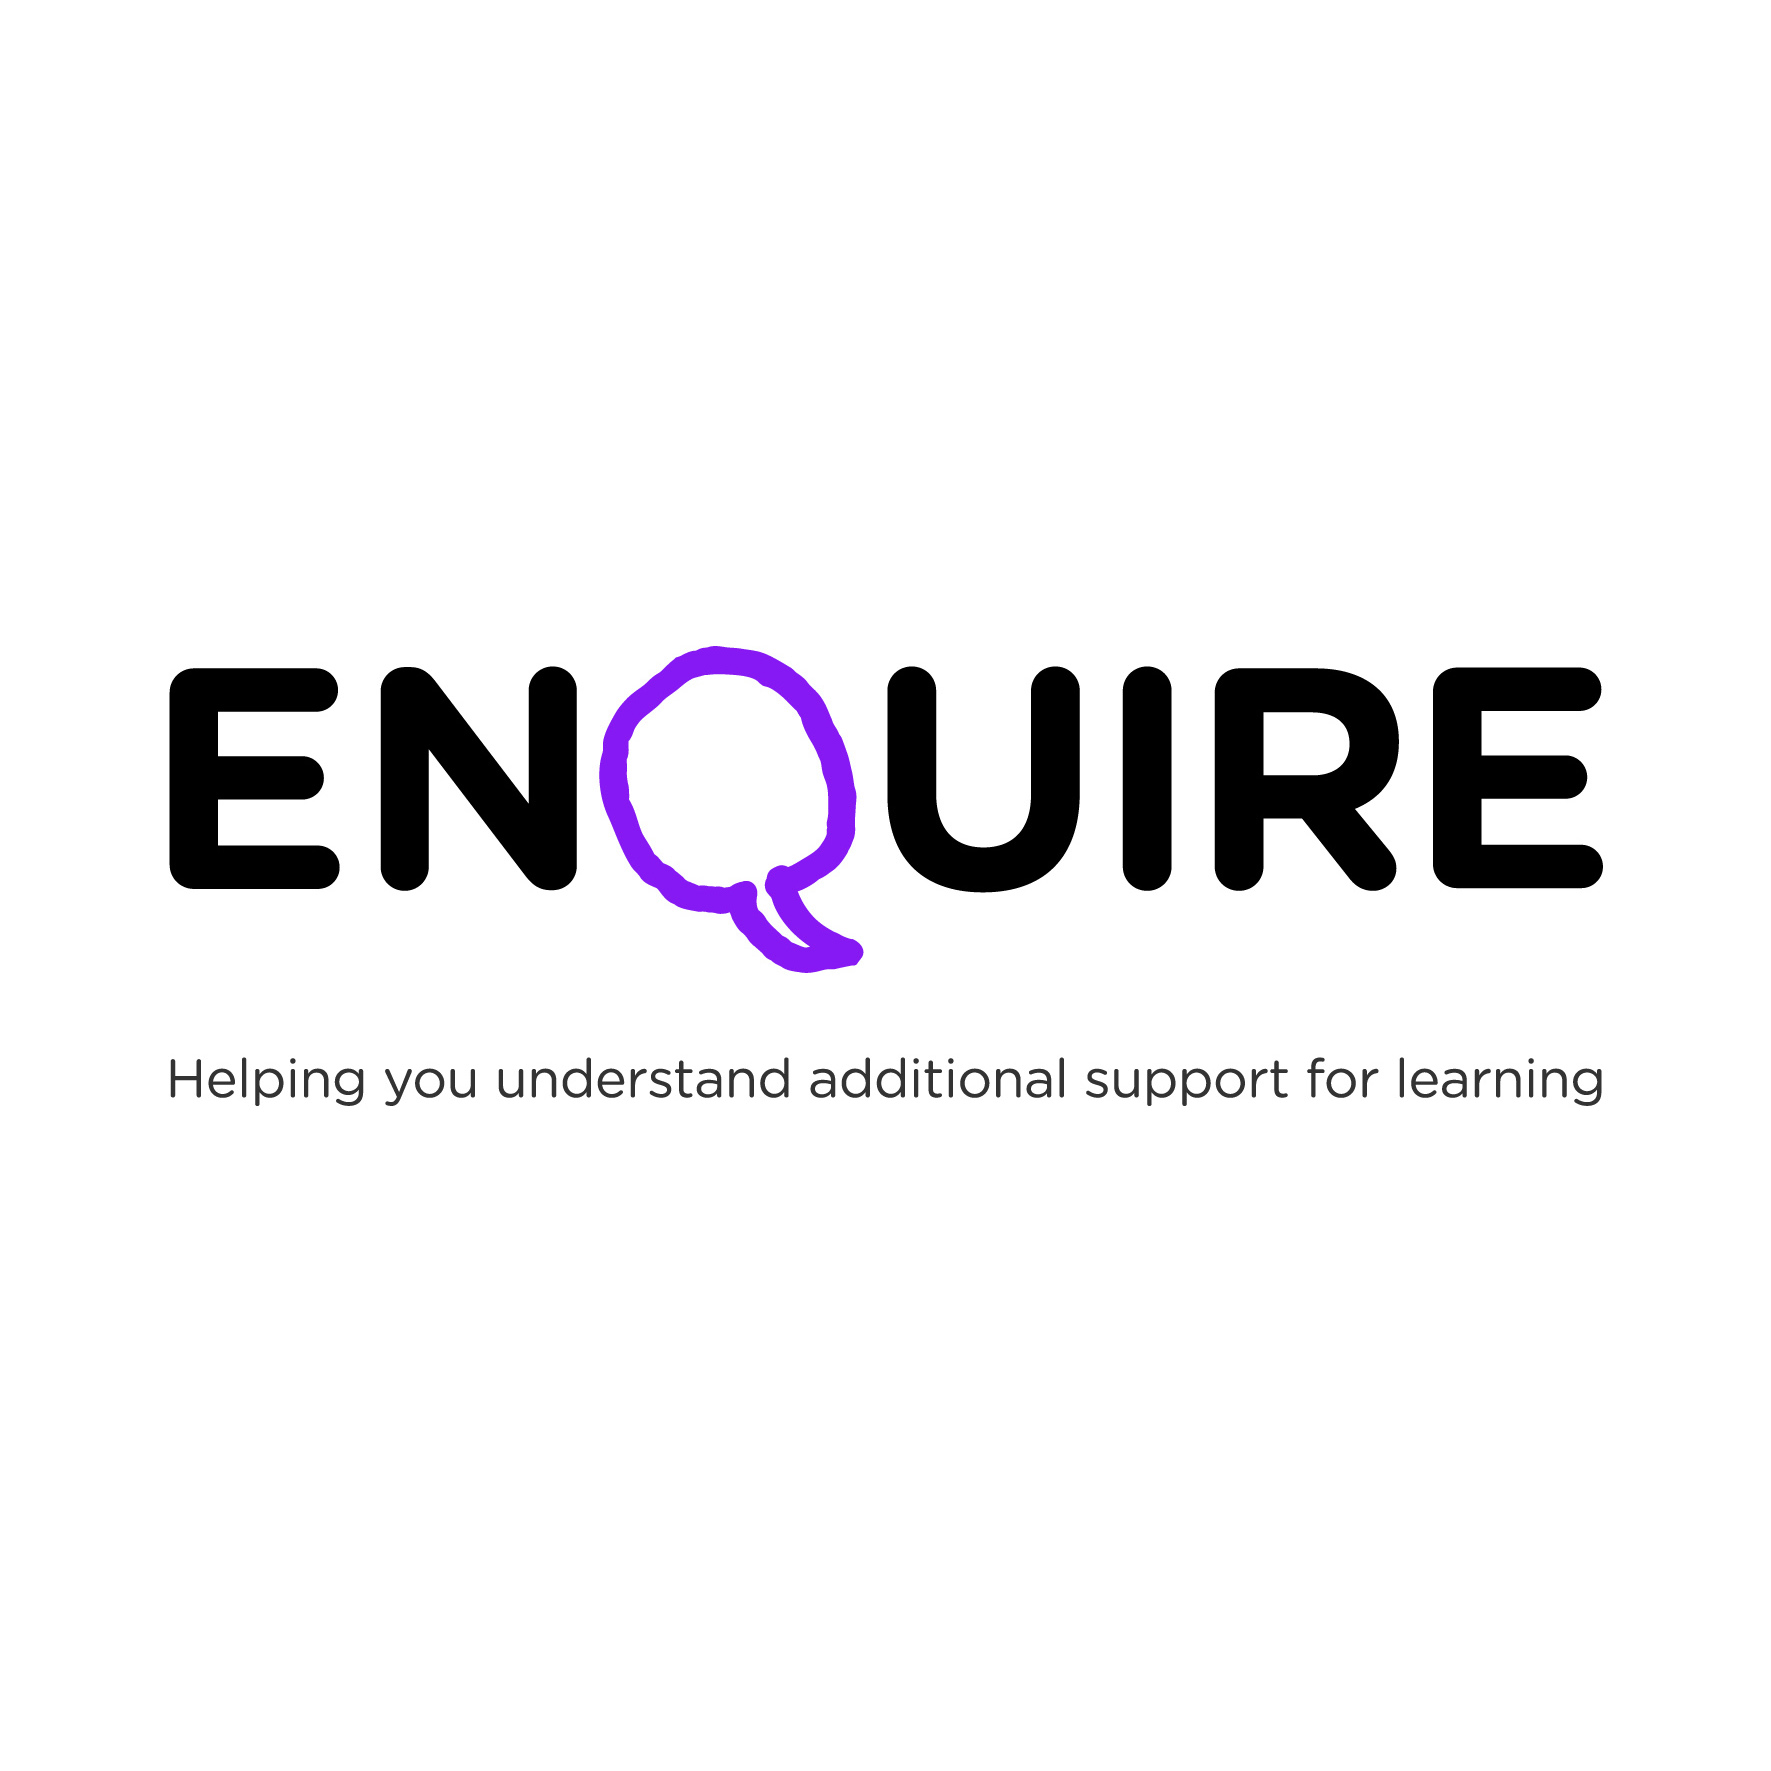 The Enquire logo on a white background. The text is in black, except the 'Q', which is a purple speech bubble. There is text underneath that reads 'Helping you understand additional support for learning